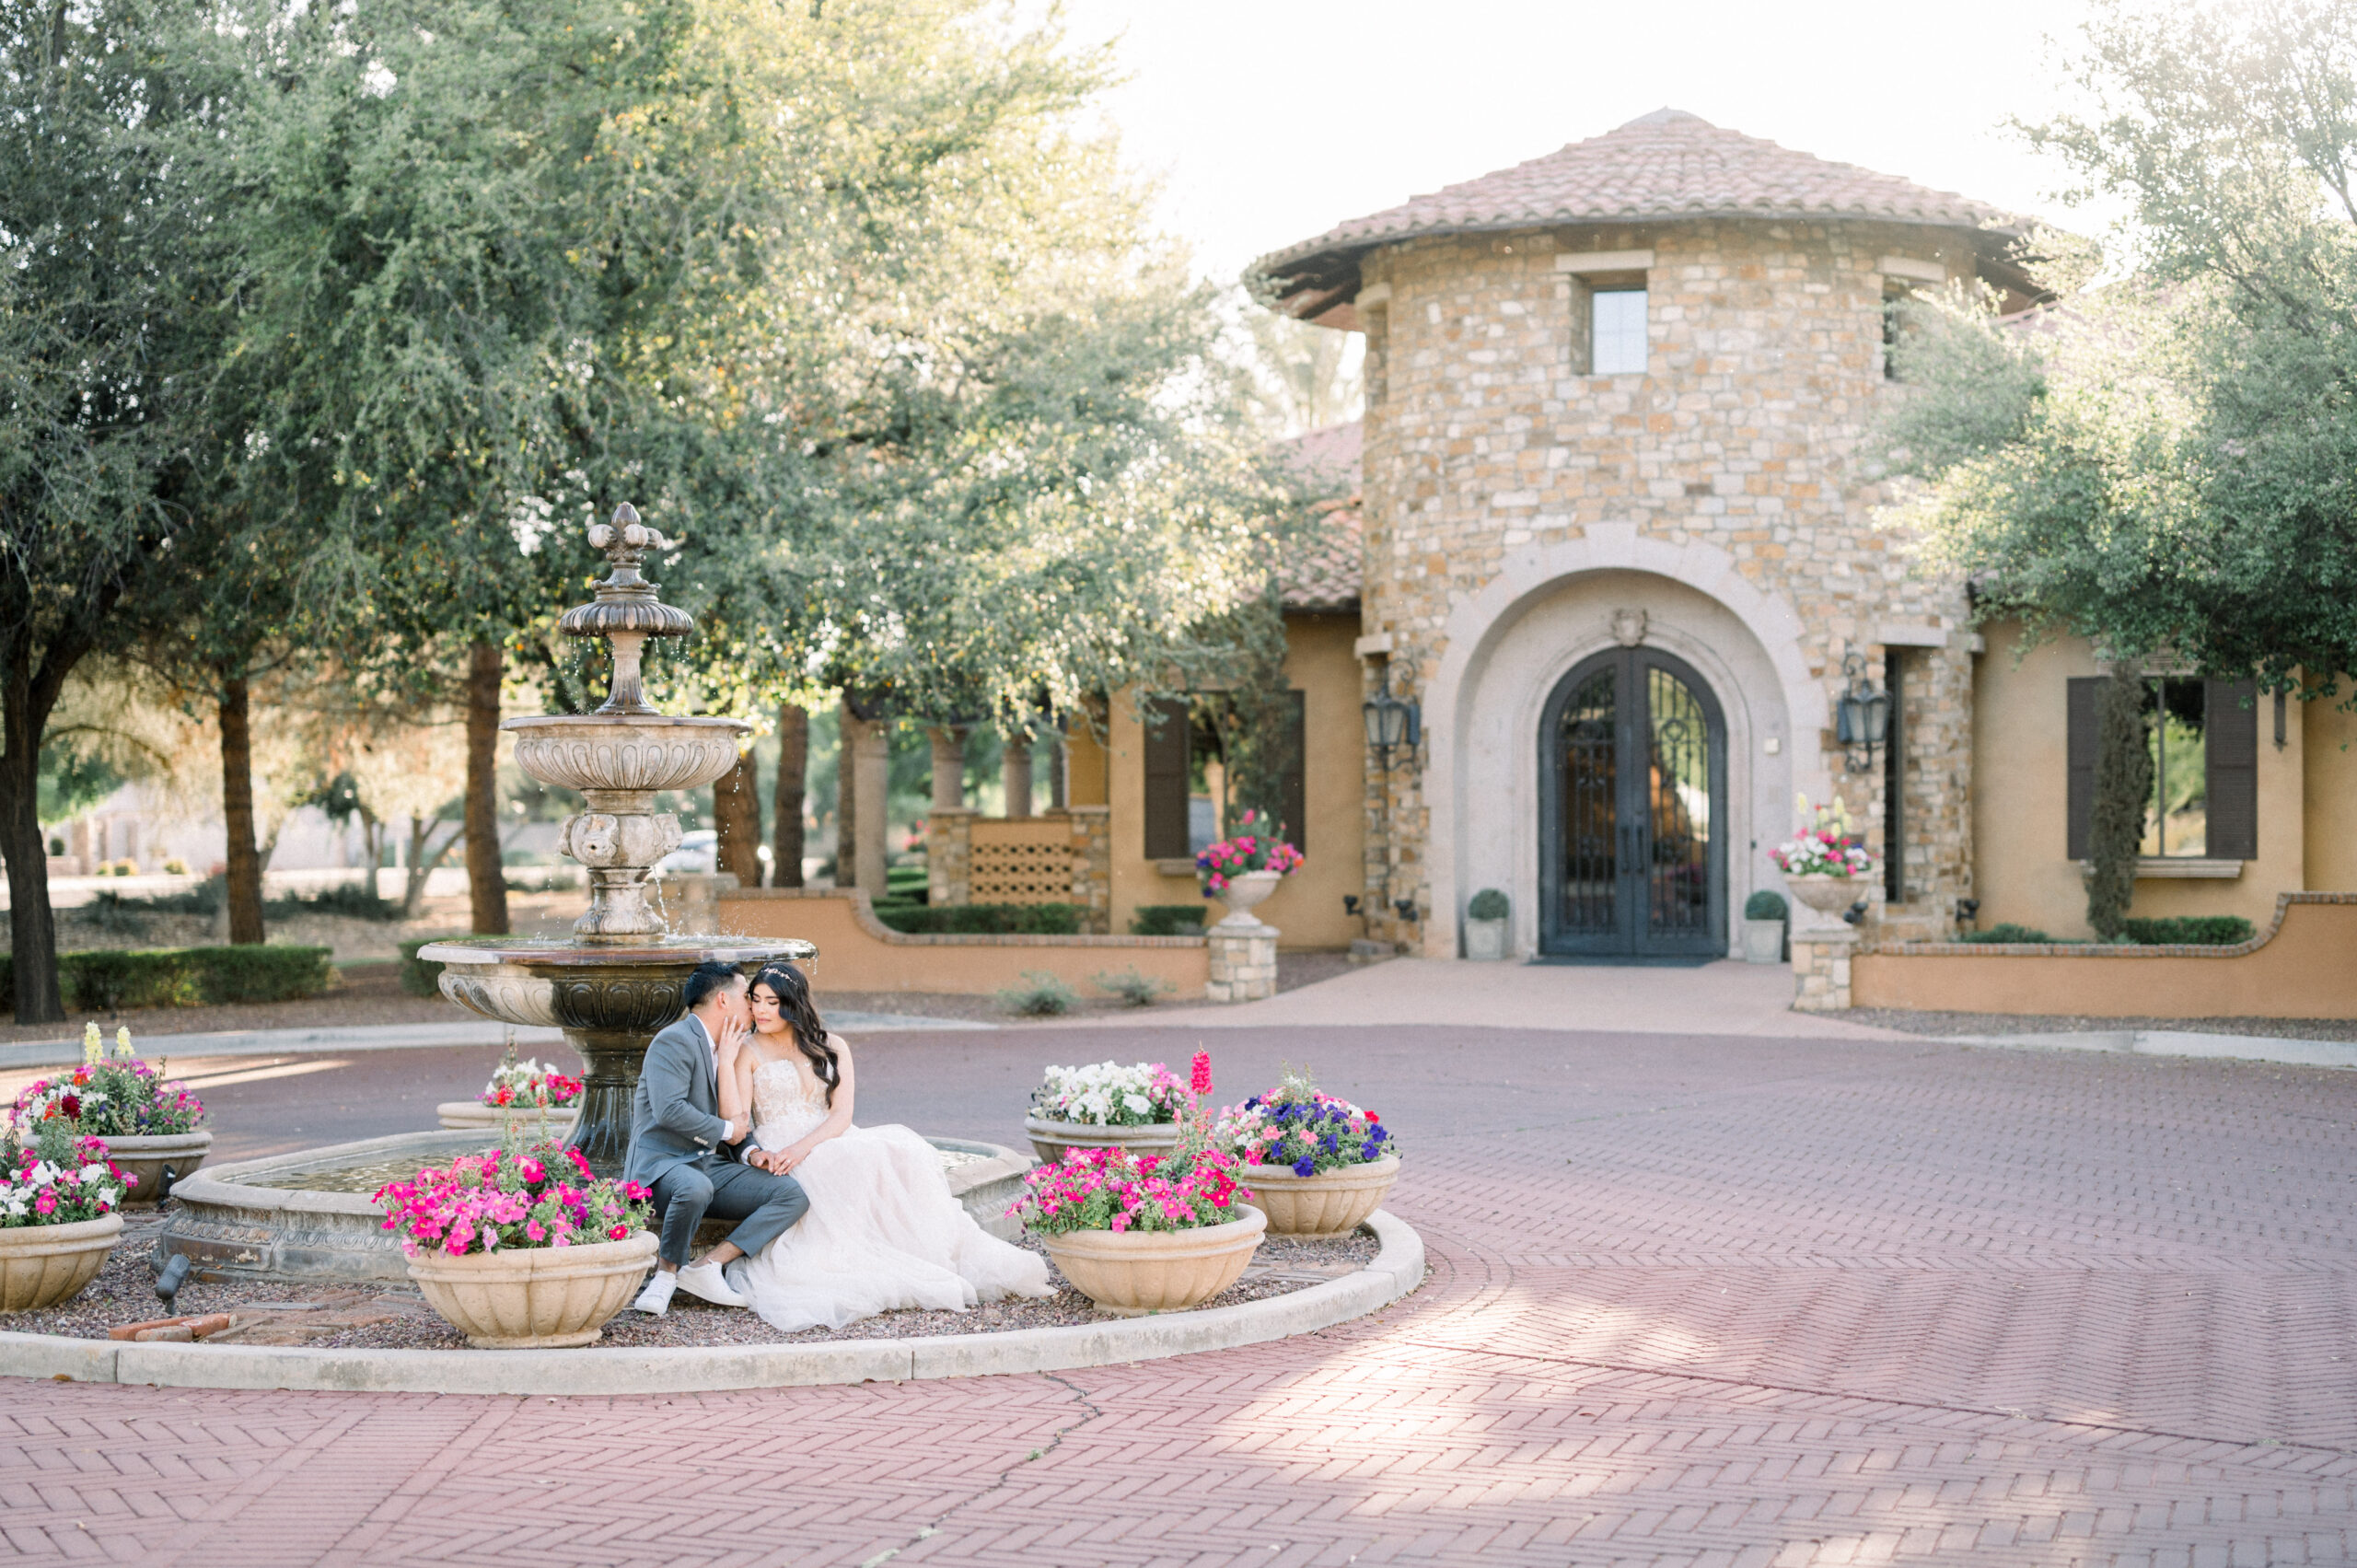 Michelle and Michaels Villa Siena spring wedding was elegant and timeless. With beautiful lilac and grey color compliments throughout the venue!